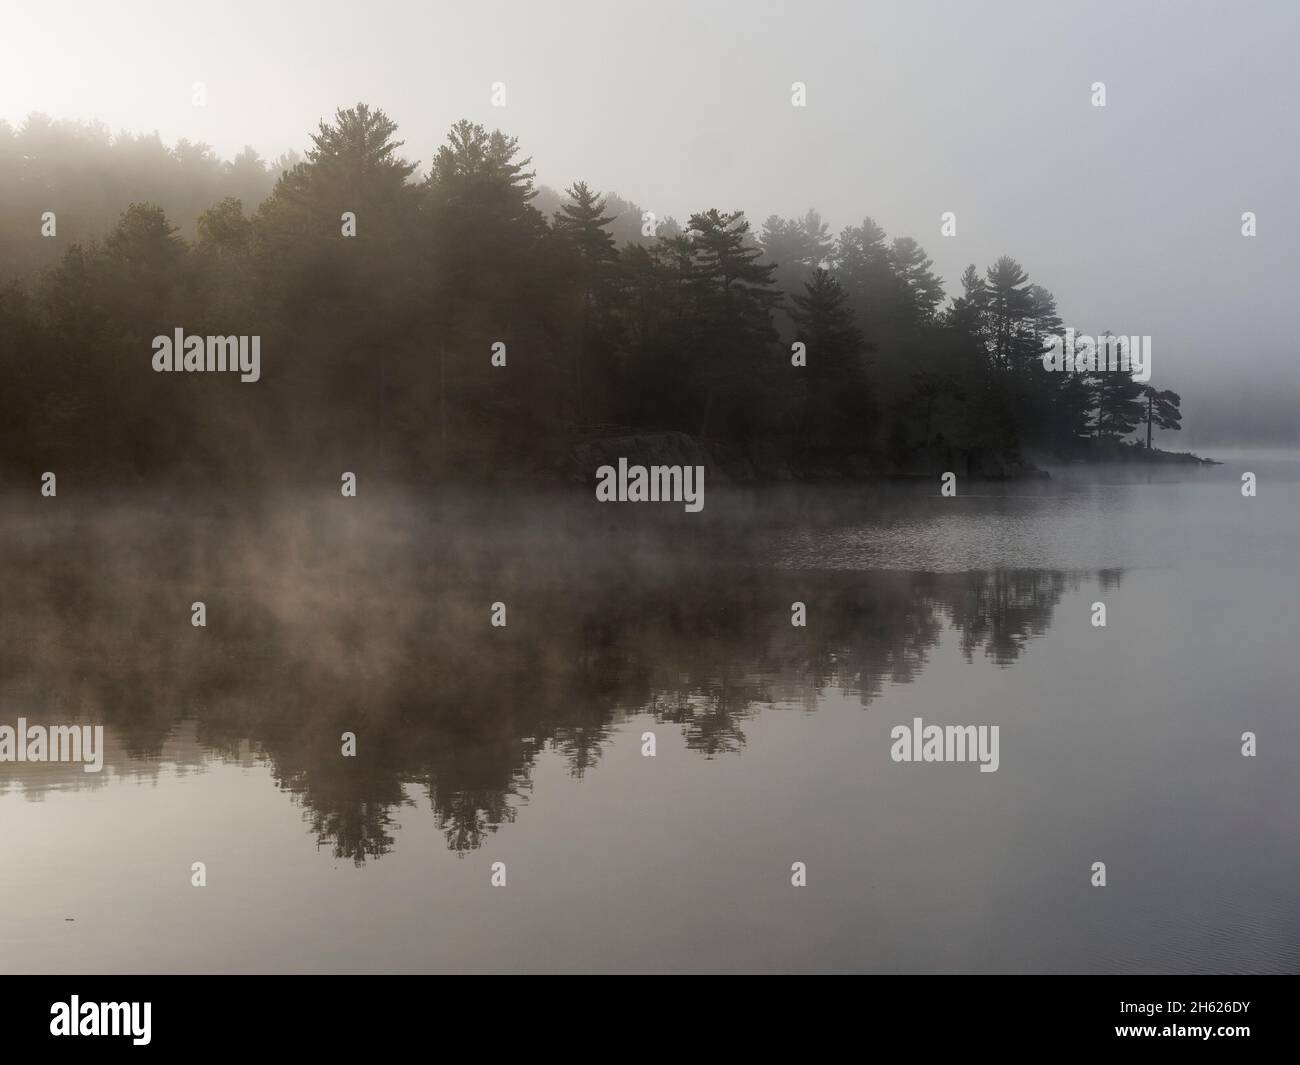 canada,ontario,kawartha highlands provincial park,nature,wilderness,scenery,silhouetted trees in morning mist Stock Photo